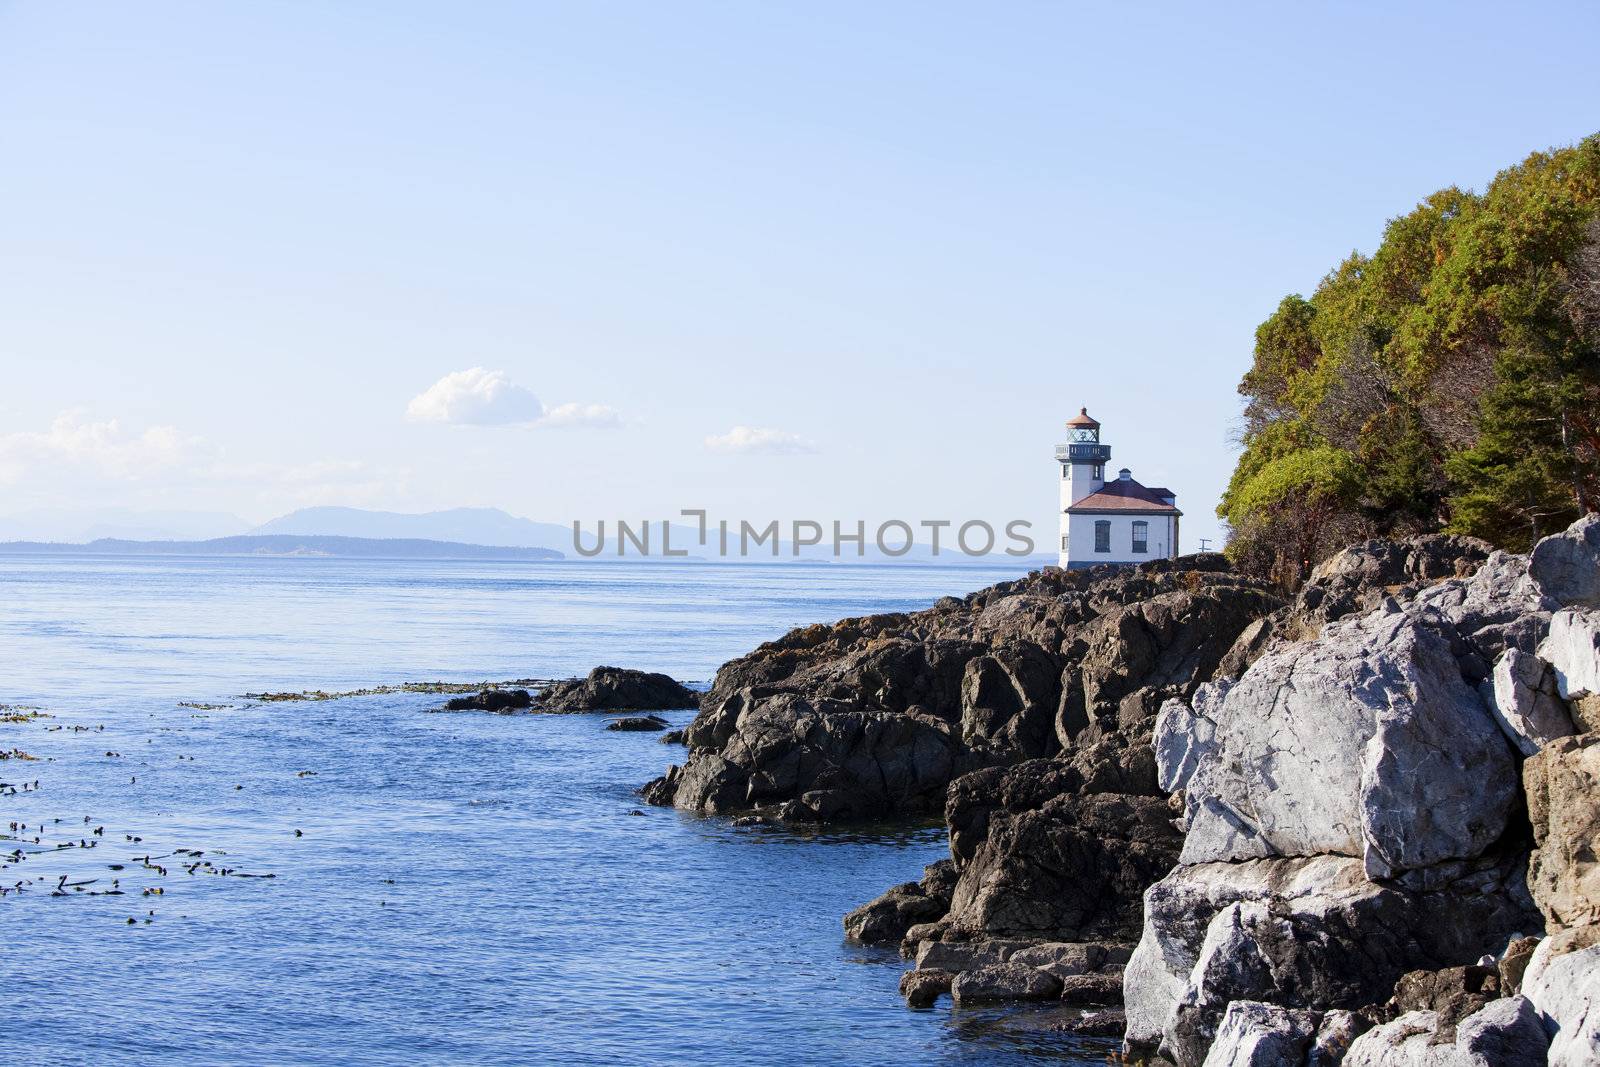 Blue waters of coast of San Juan island, Washington state. Lighthouse at Whale Watch Park in background